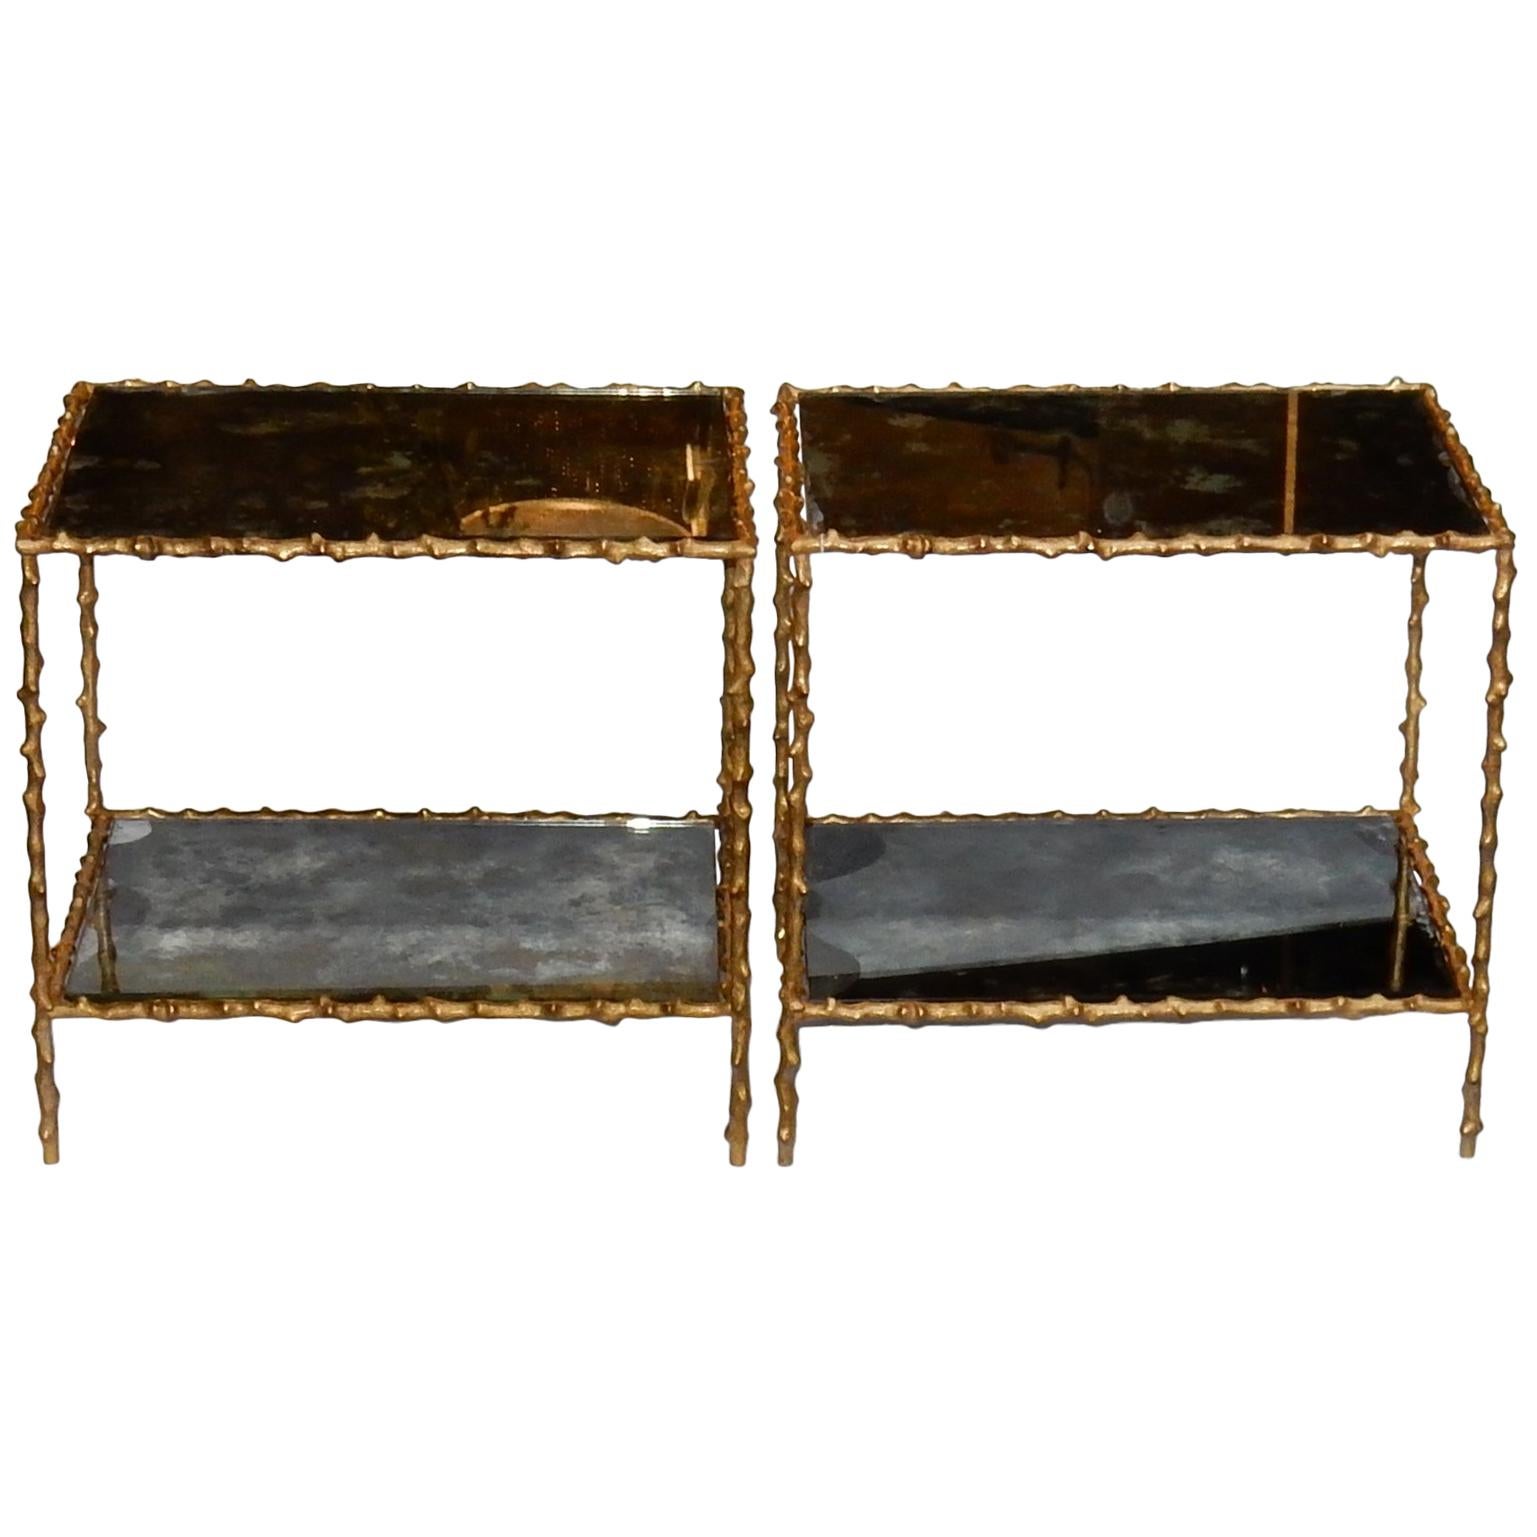 1950-1970 Pair of End of Sofa Maison Jansen, Gilt Bronze, Tops in Olded Mirror